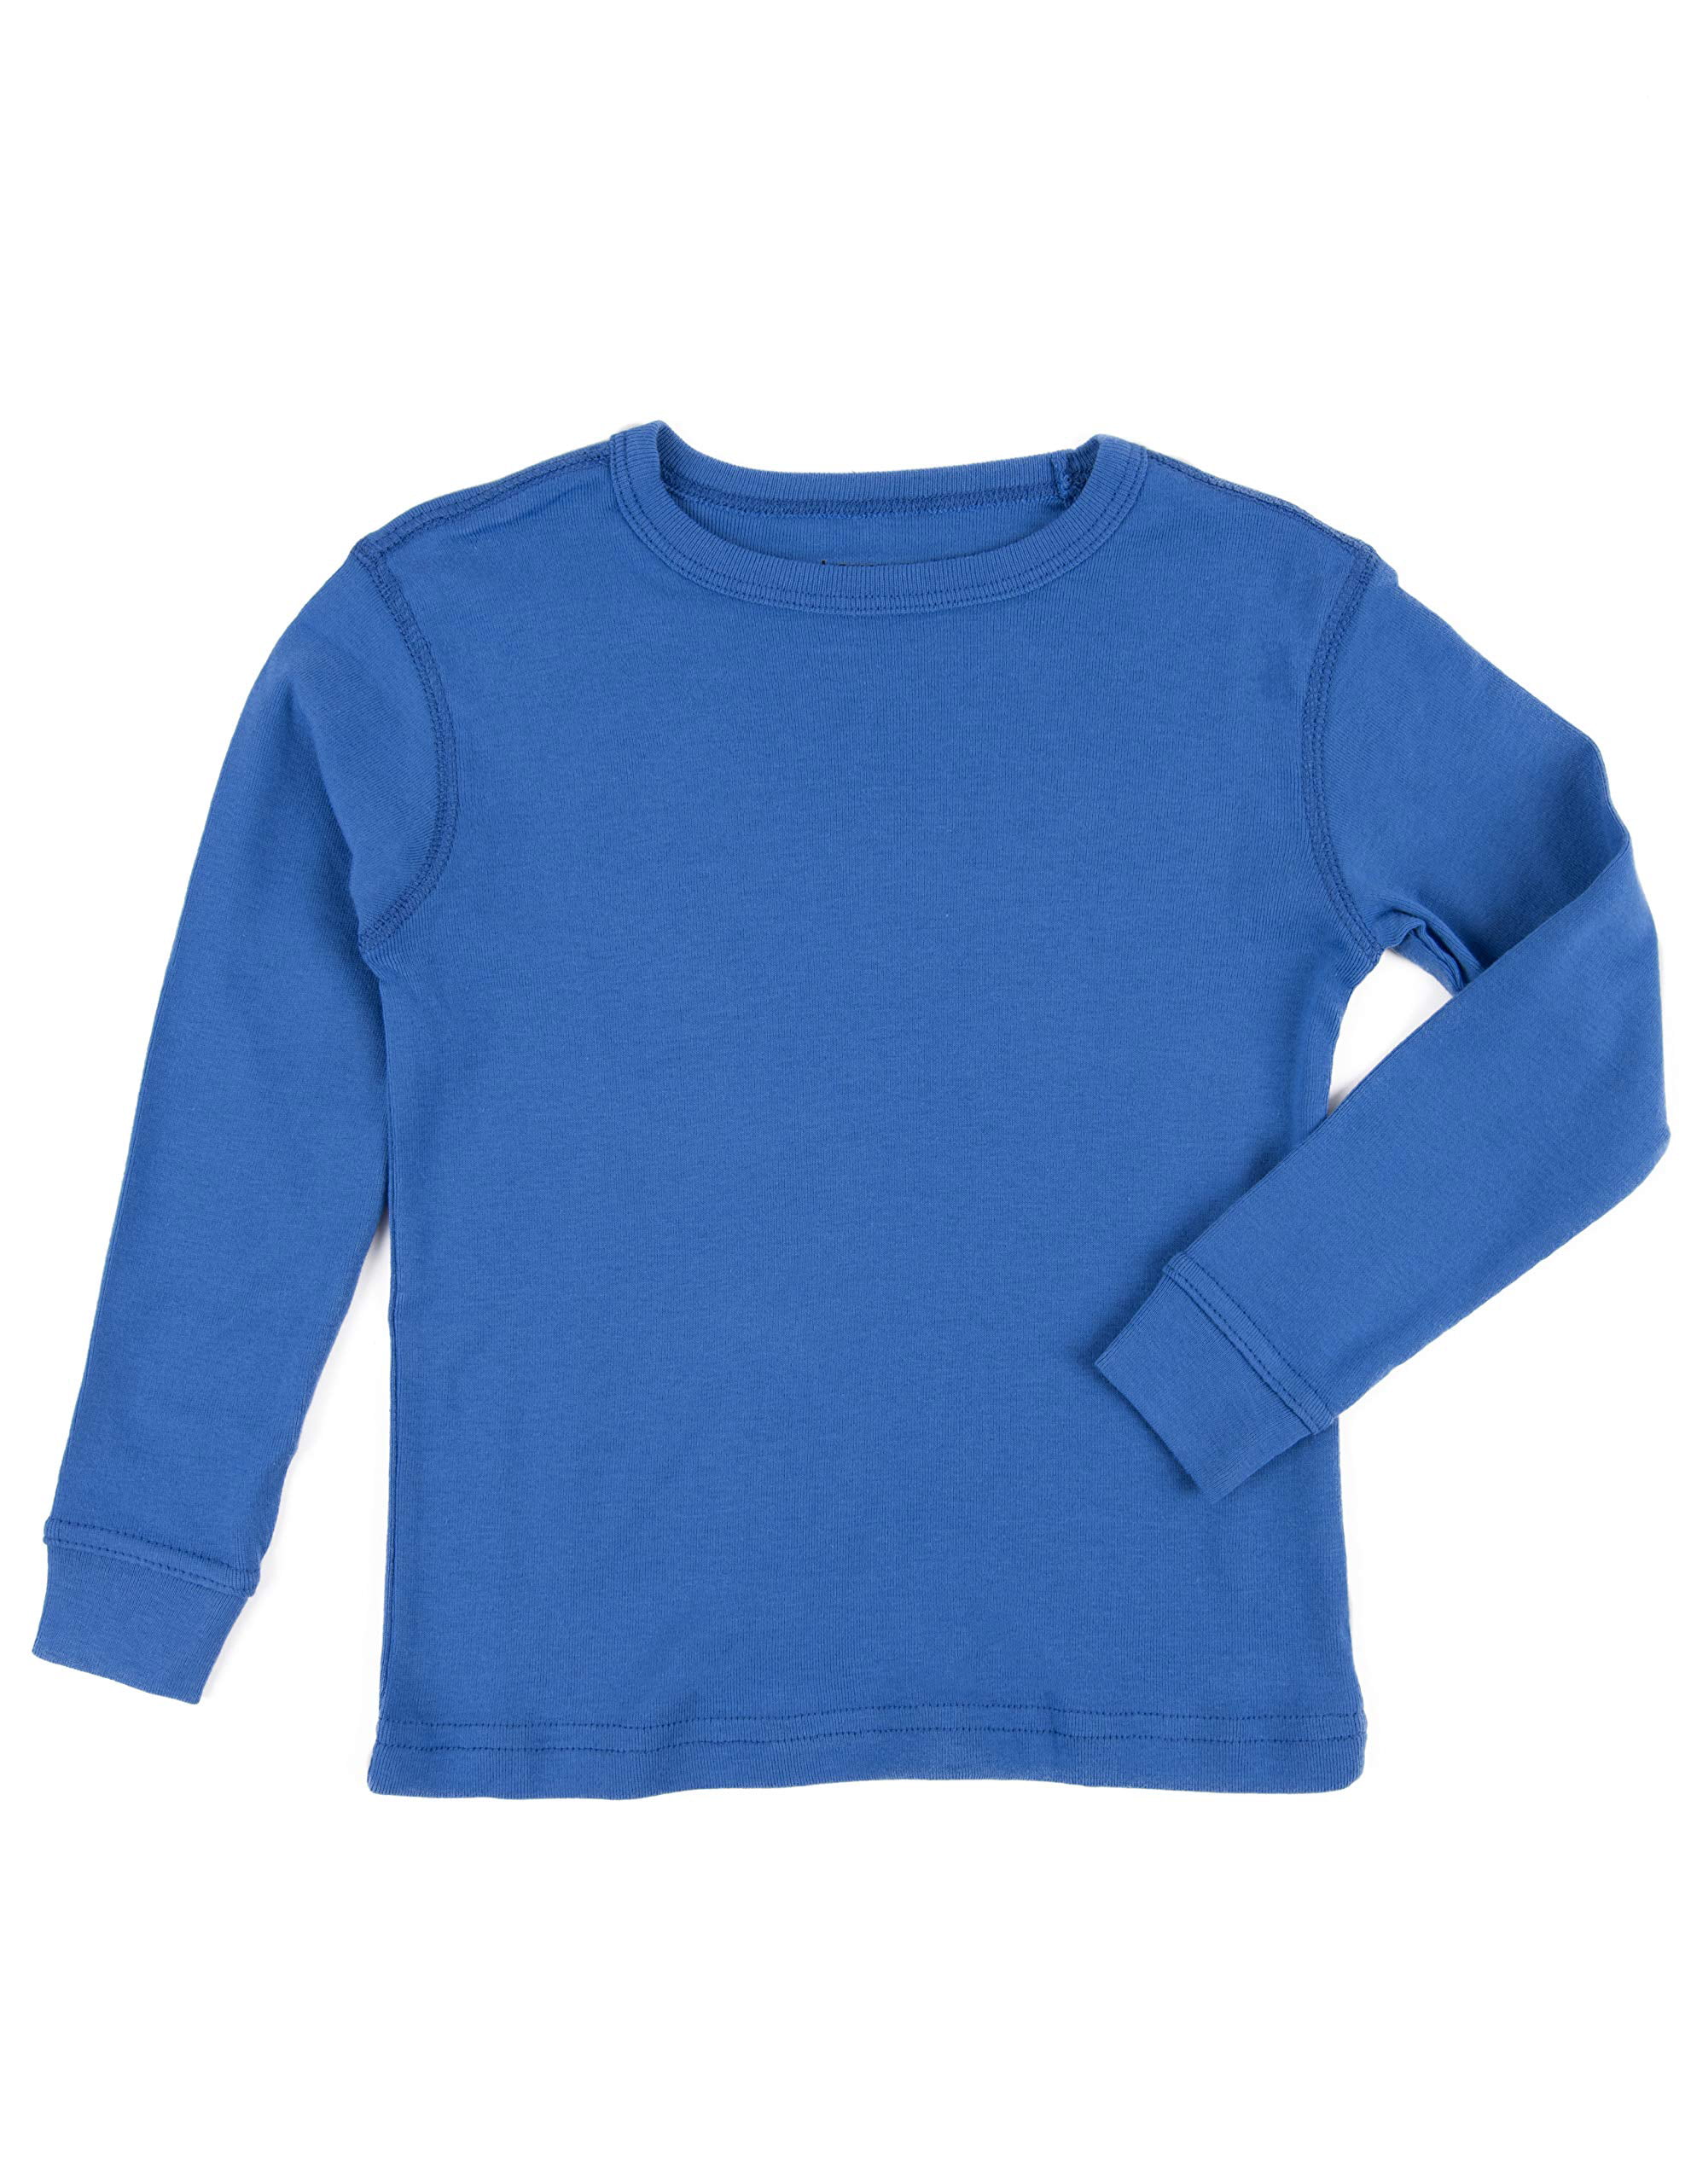 Size 2-6 Years CuteOn Kids Long Sleeve T-Shirt 100% Cotton Variety of Colors 